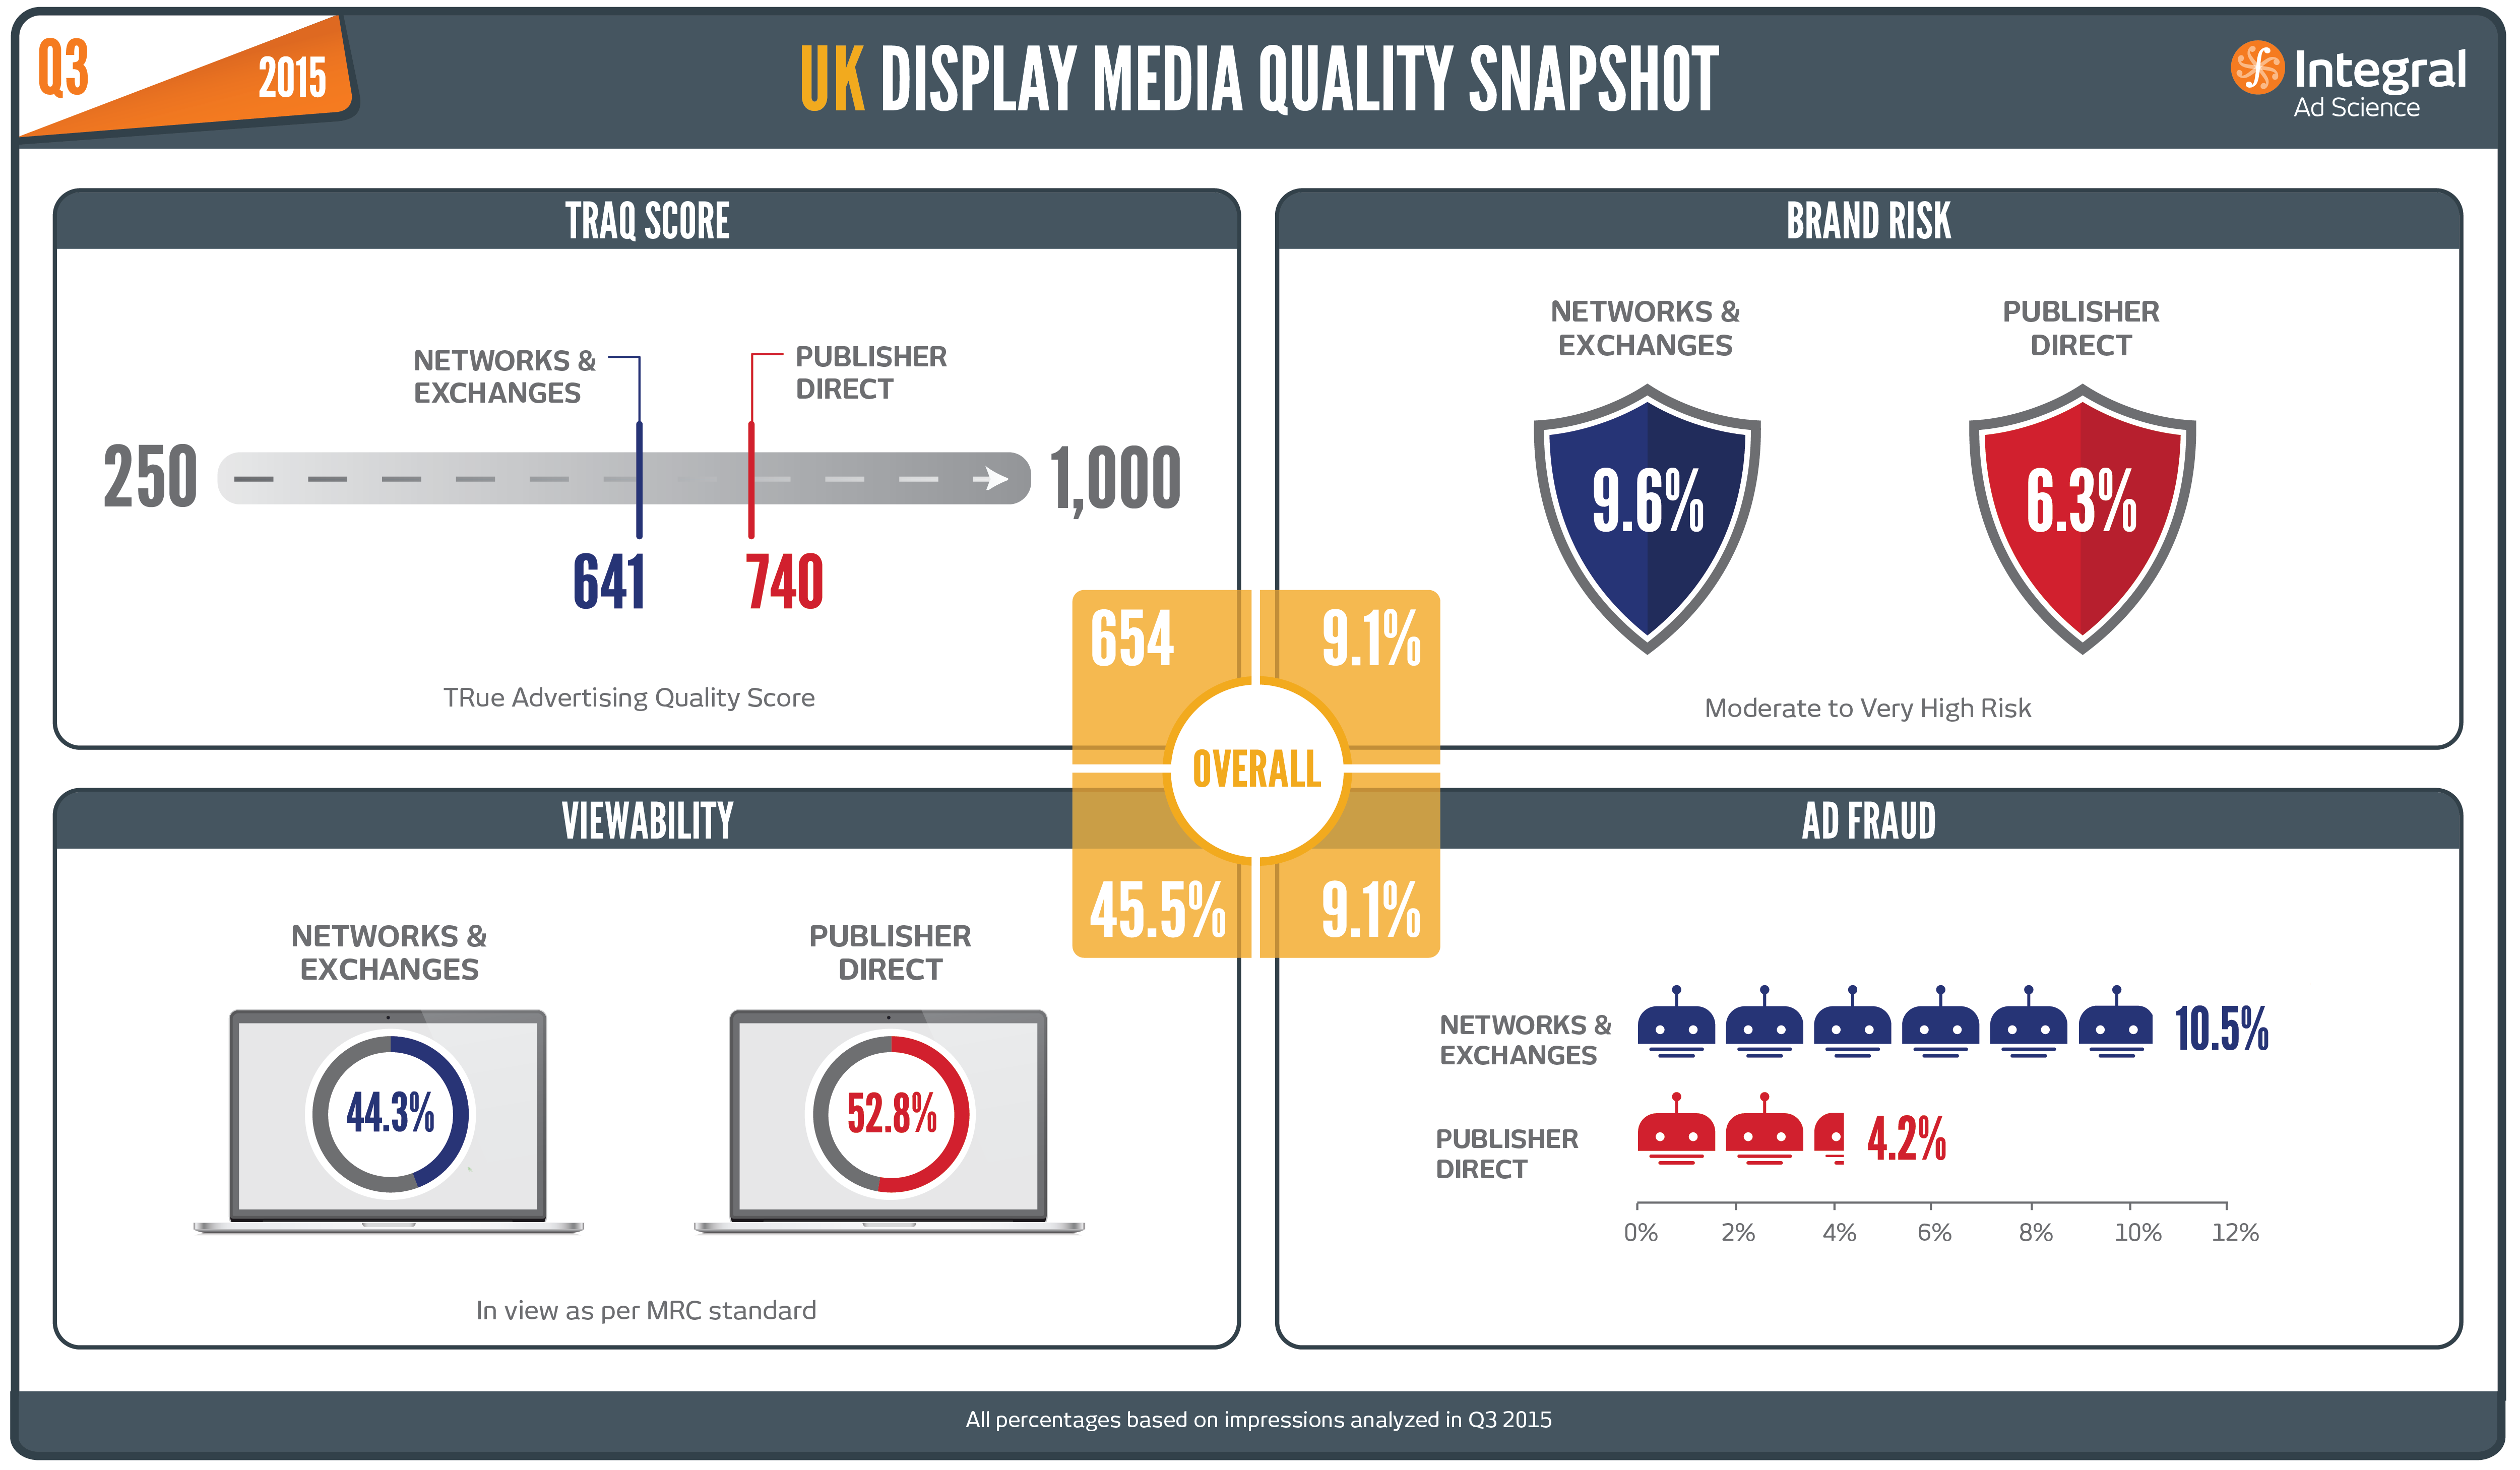 Less Than Half of Ads in Q3 Were Viewable